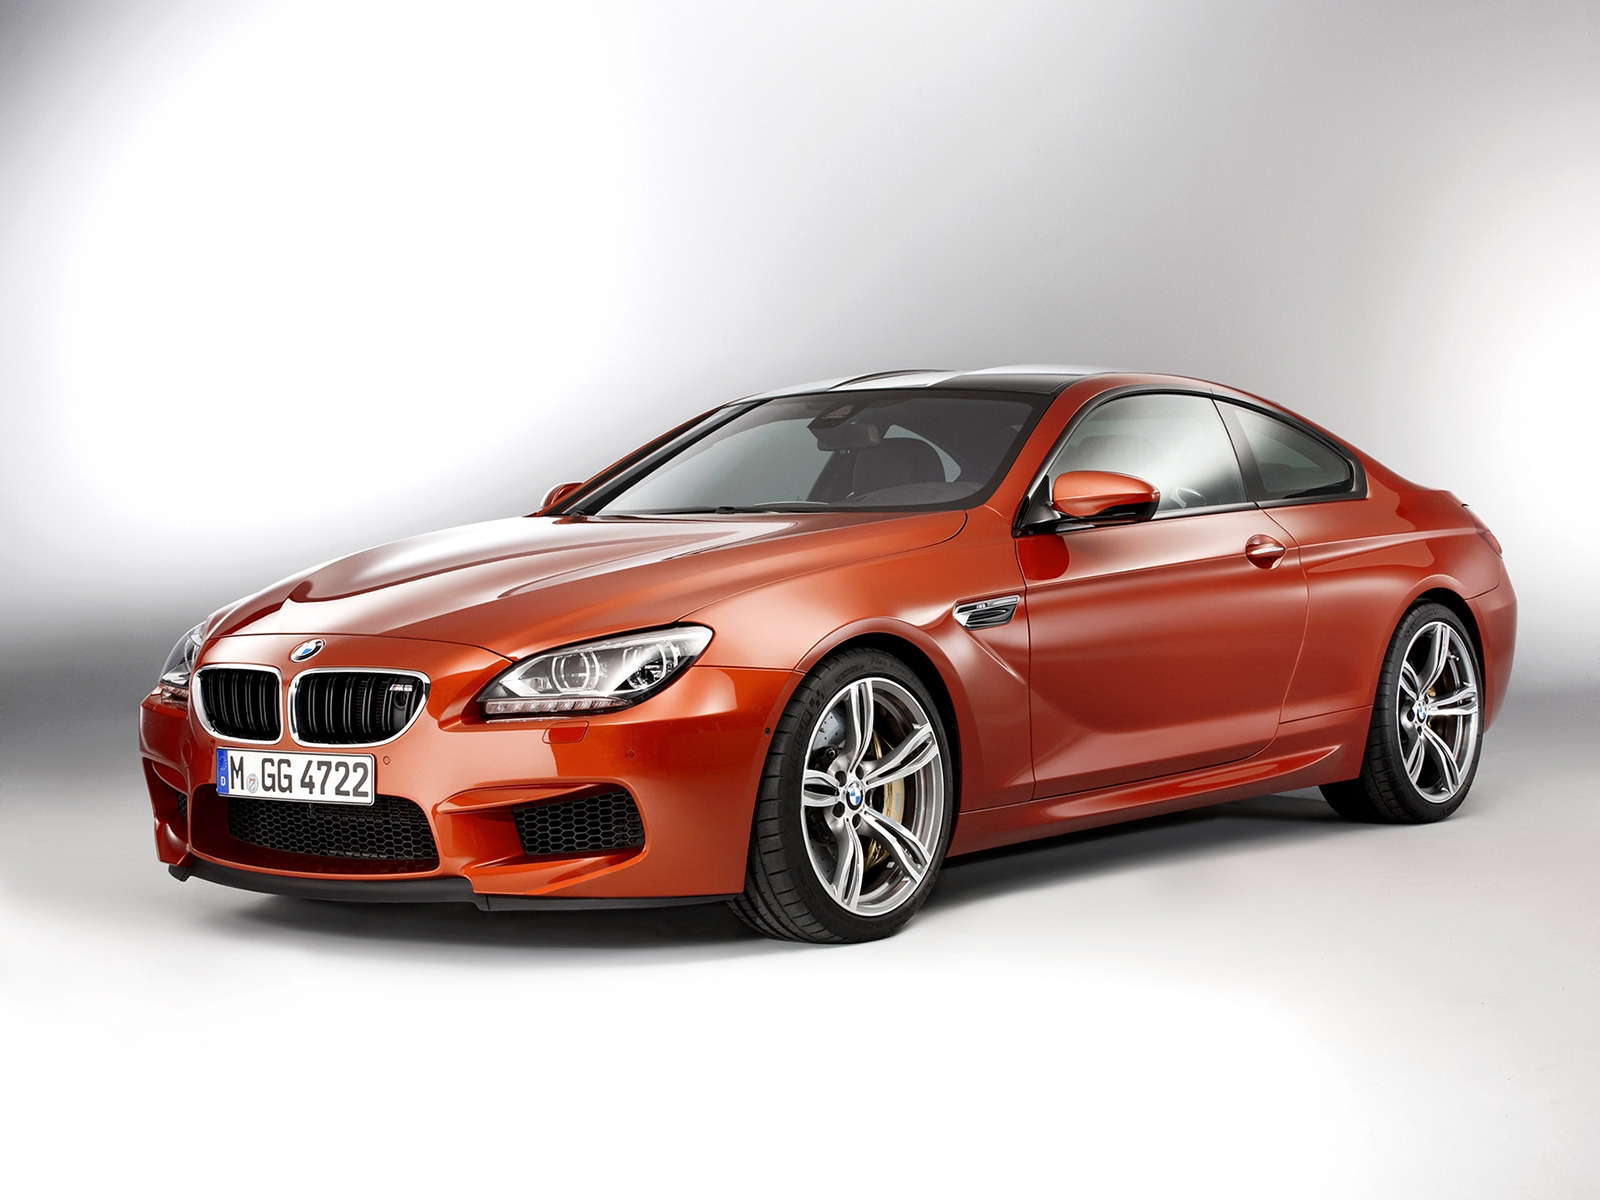 2013 BMW M6 Coupe Studio for 1600 x 1200 resolution